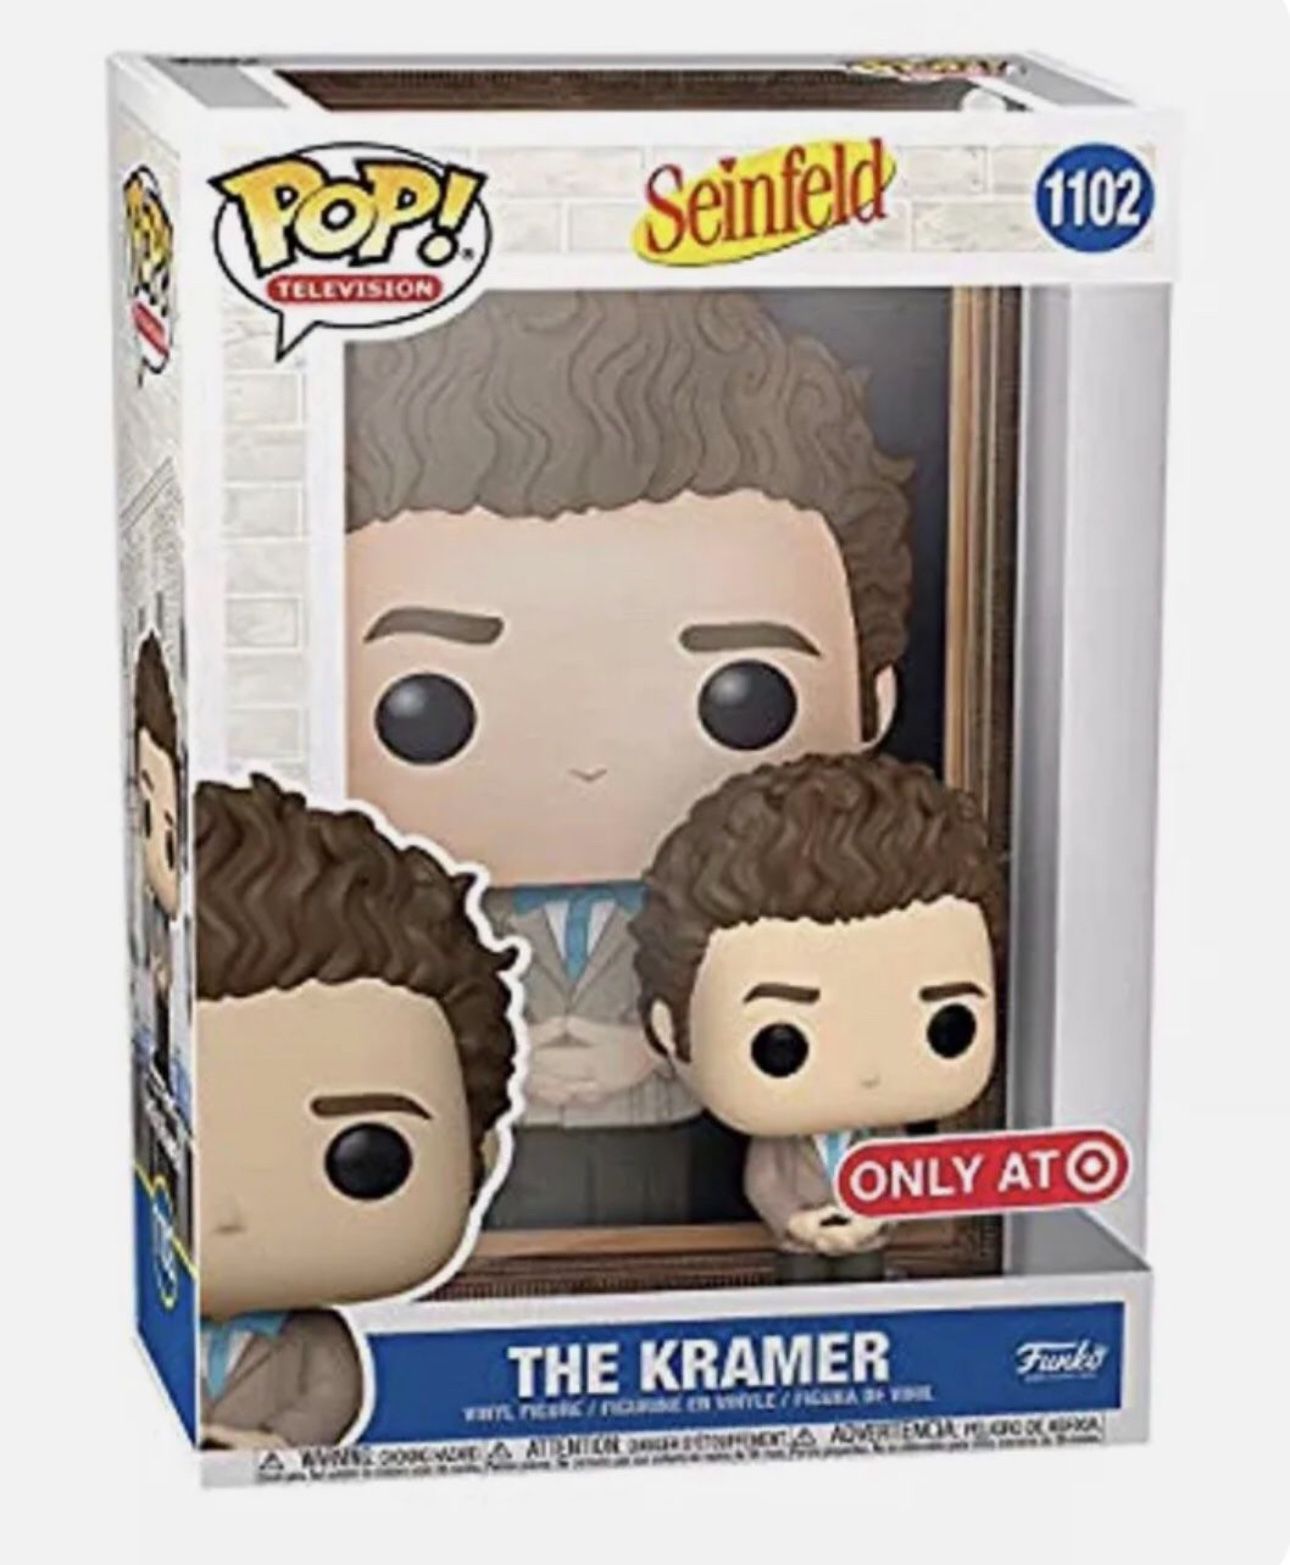 Funko Pop! Television - Seinfeld - The Kramer - 1102 - Target Exclusive